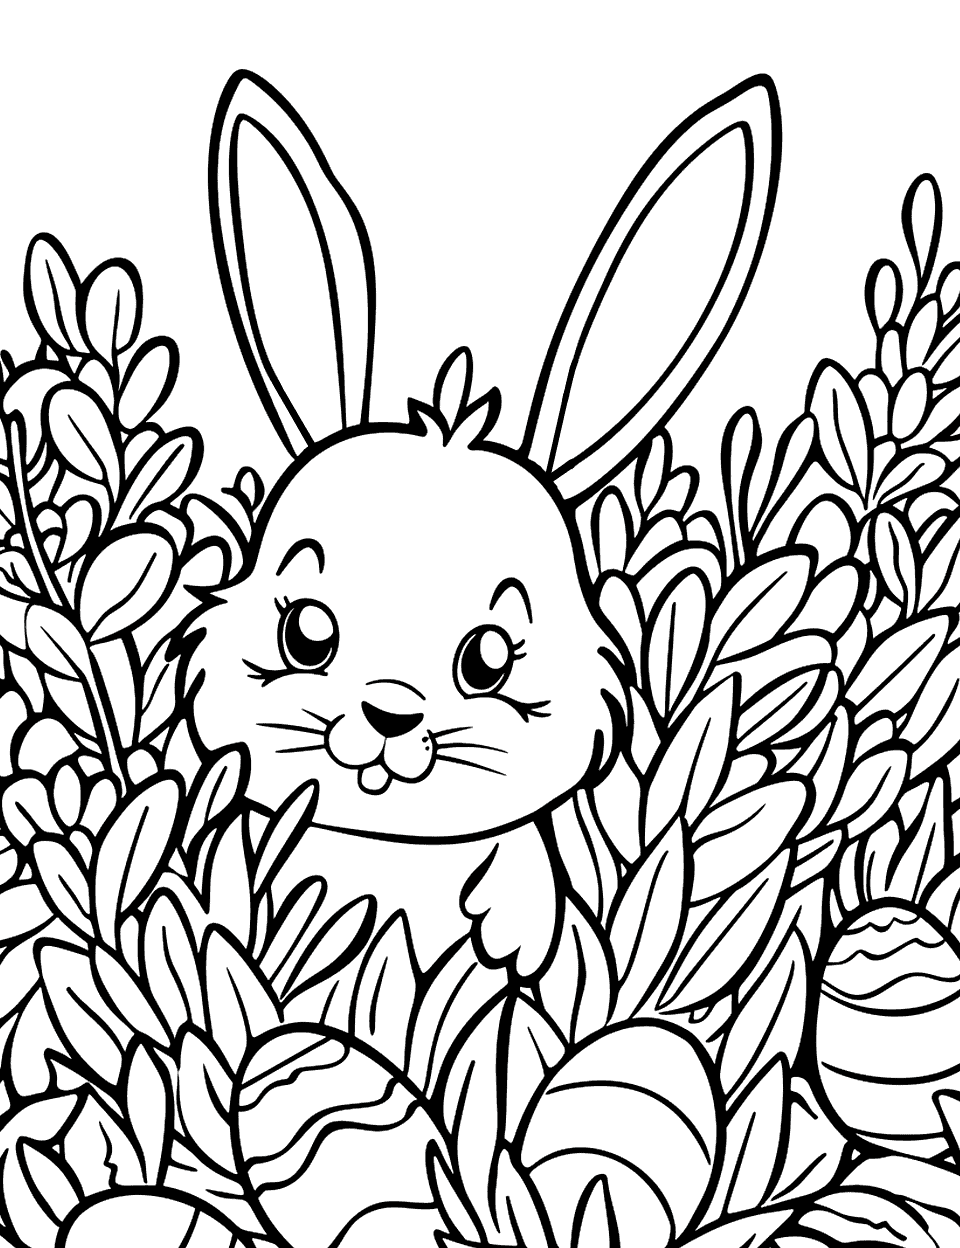 Easter Egg Hideout Bunny Coloring Page - A scene of a bunny hiding behind a bush peeking out, as Easter eggs are hidden all around.